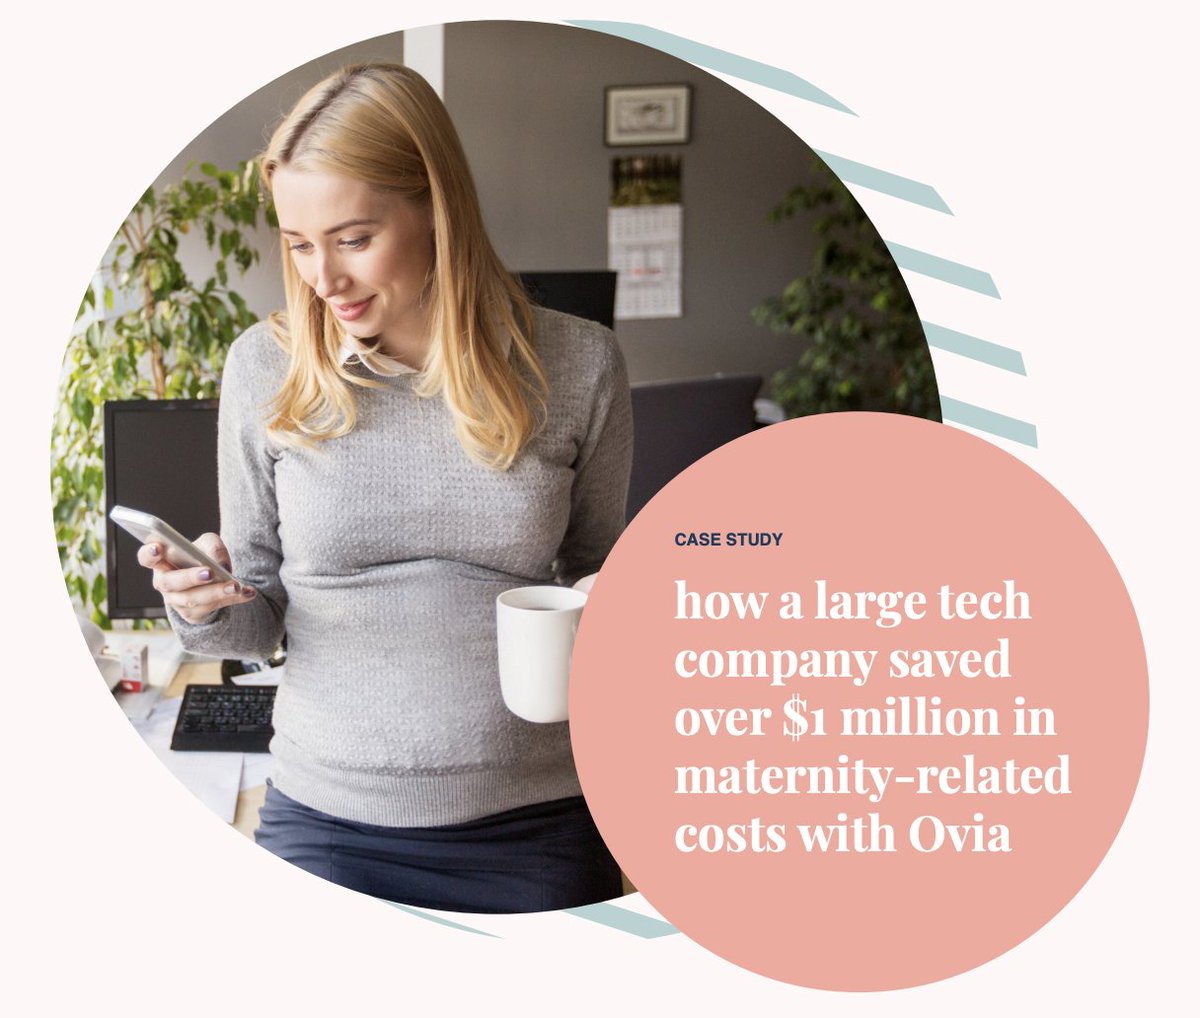 Learn how Ovia partnered with a tech organization to improve the lives of employees and their families while achieving a 7:1 ROI in our latest case study: ow.ly/FGZ150Nt3Uz